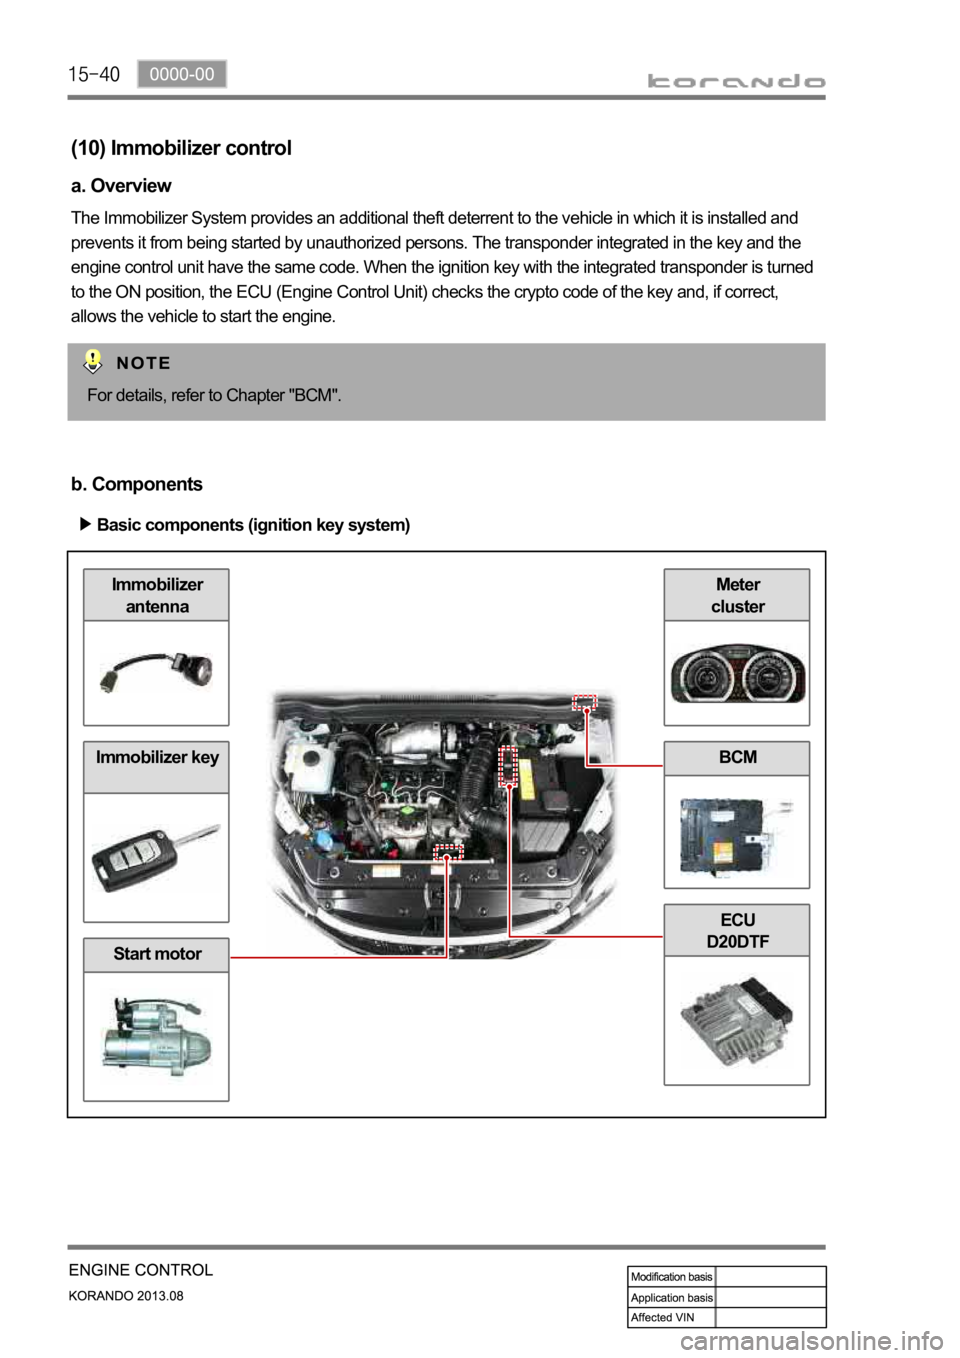 SSANGYONG KORANDO 2013  Service Manual Meter 
clusterImmobilizer 
antenna
Immobilizer key
Start motor
BCM
ECU
D20DTF
(10) Immobilizer control
a. Overview
The Immobilizer System provides an additional theft deterrent to the vehicle in which